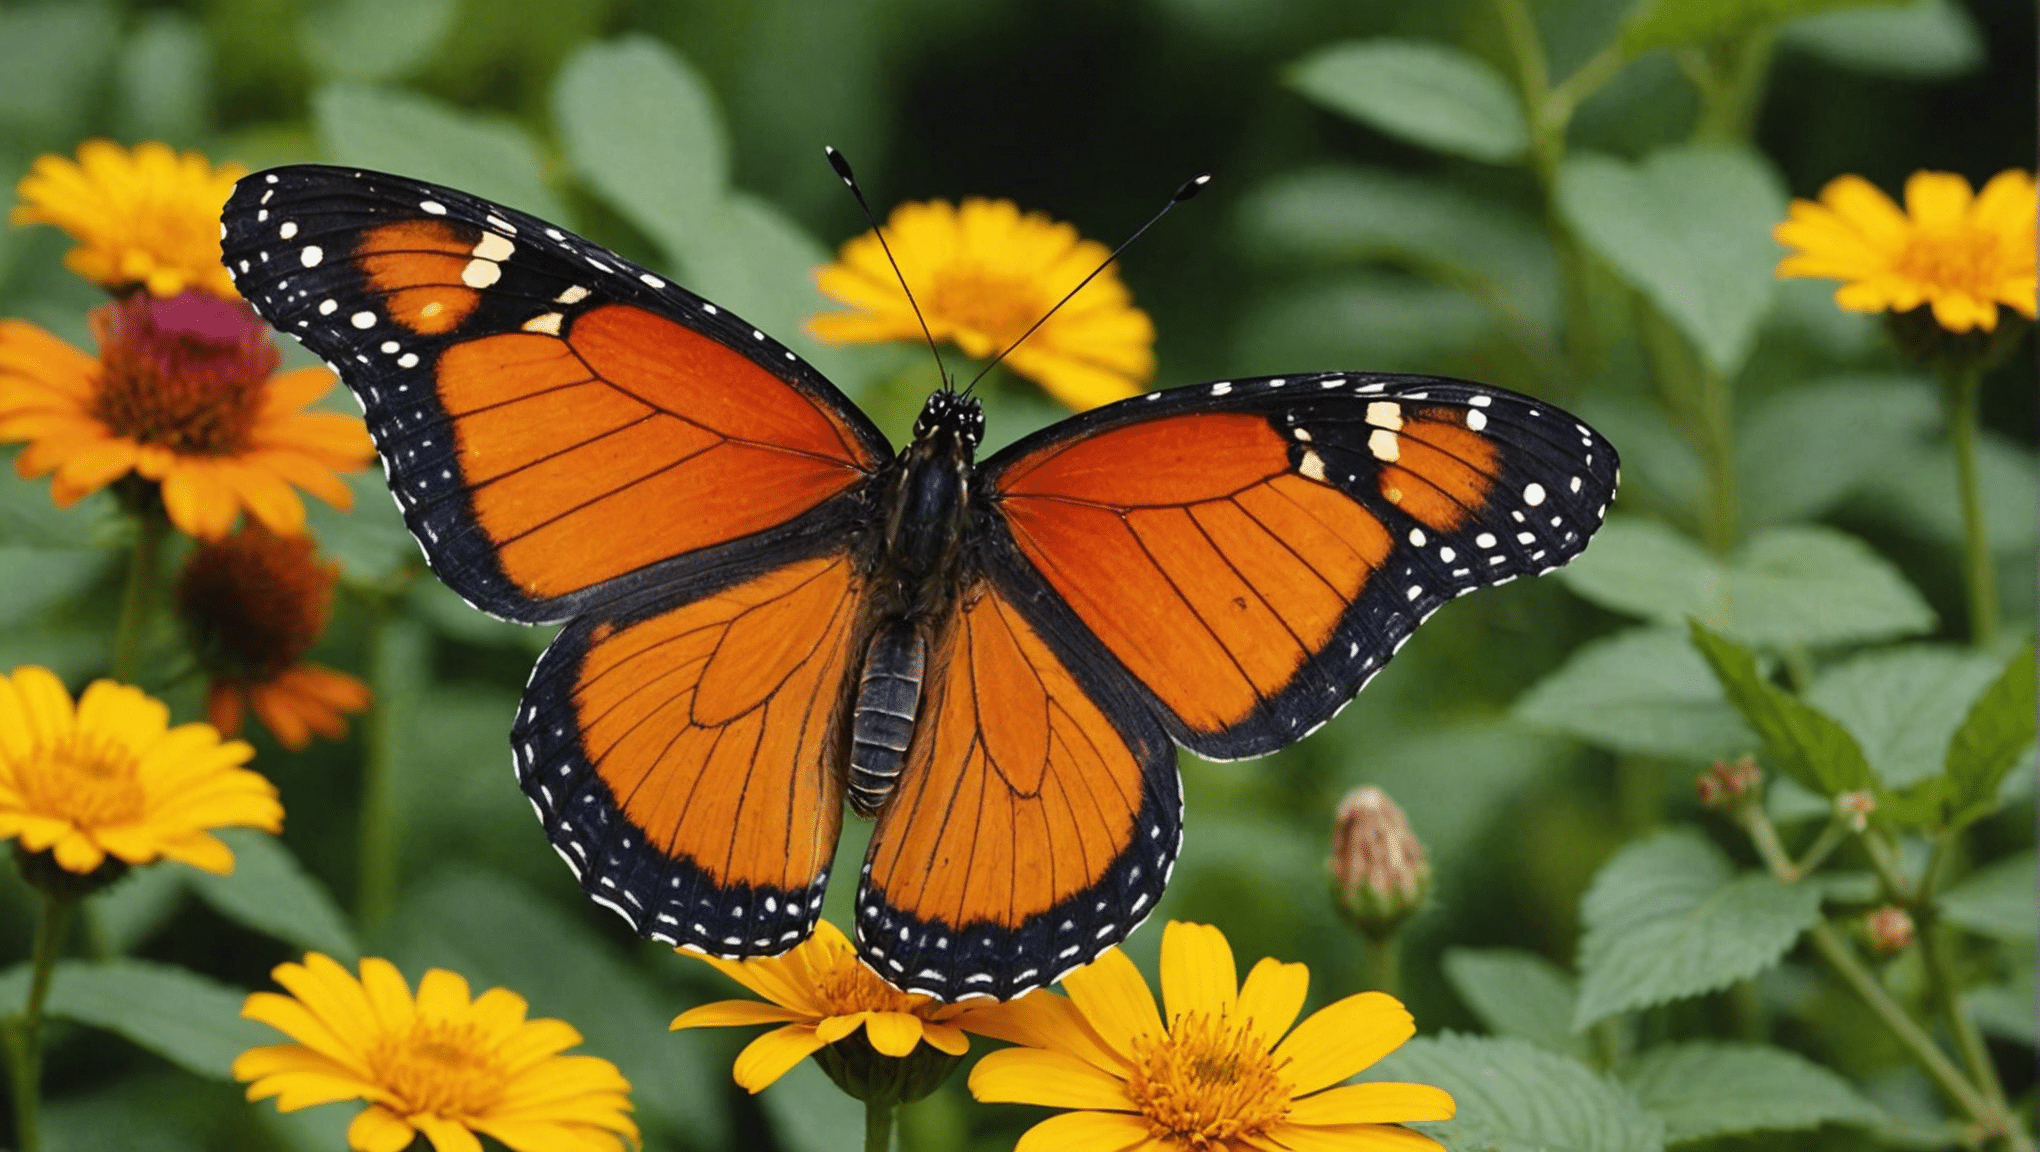 discover fun and fascinating facts about butterflies with our engaging content.